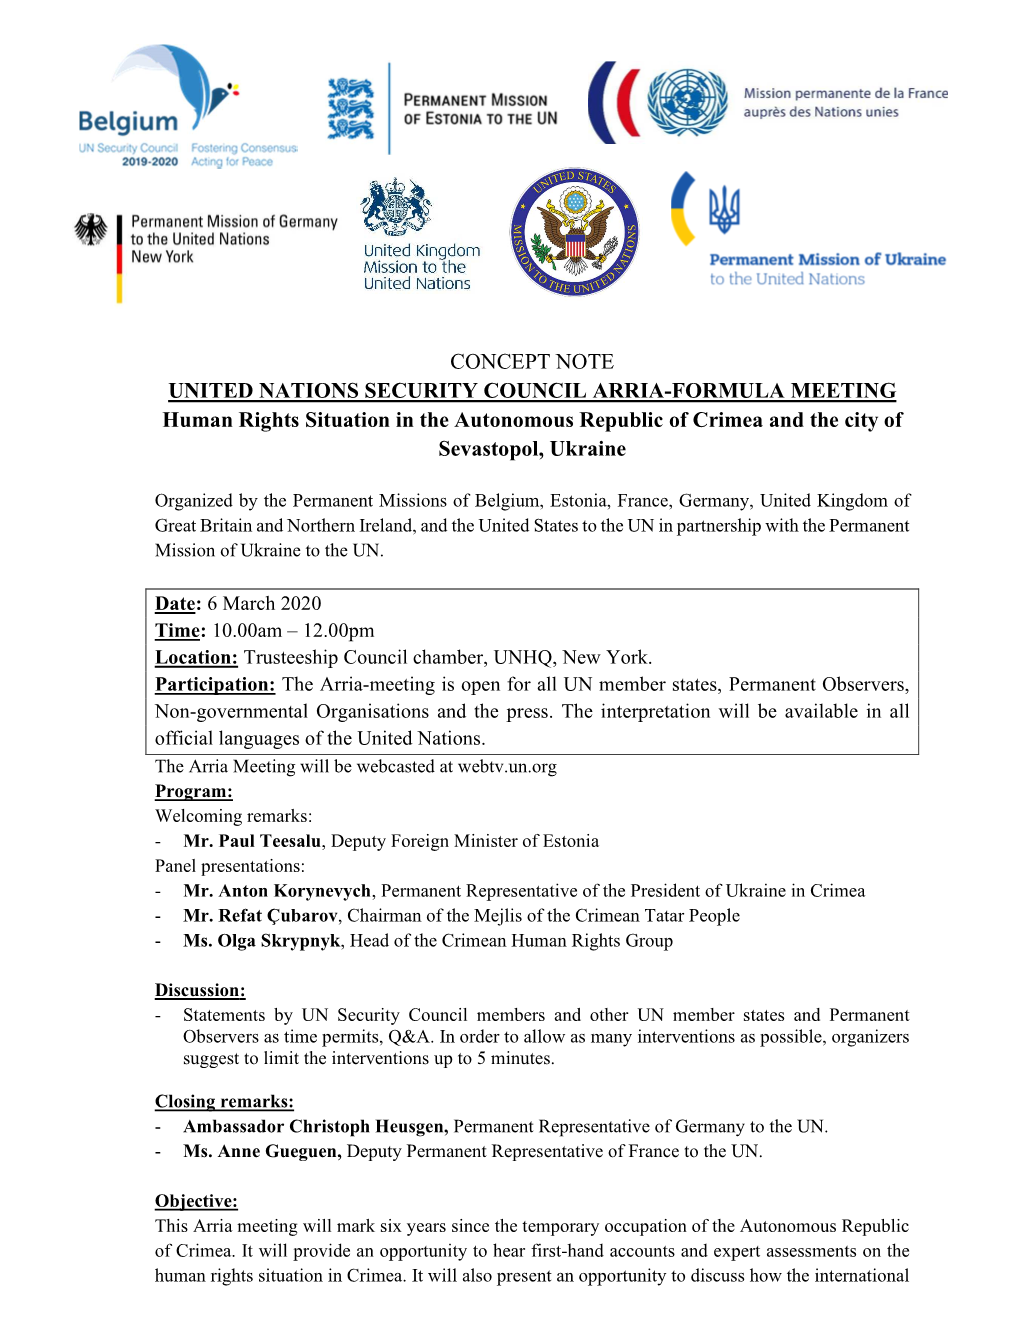 CONCEPT NOTE UNITED NATIONS SECURITY COUNCIL ARRIA-FORMULA MEETING Human Rights Situation in the Autonomous Republic of Crimea and the City of Sevastopol, Ukraine